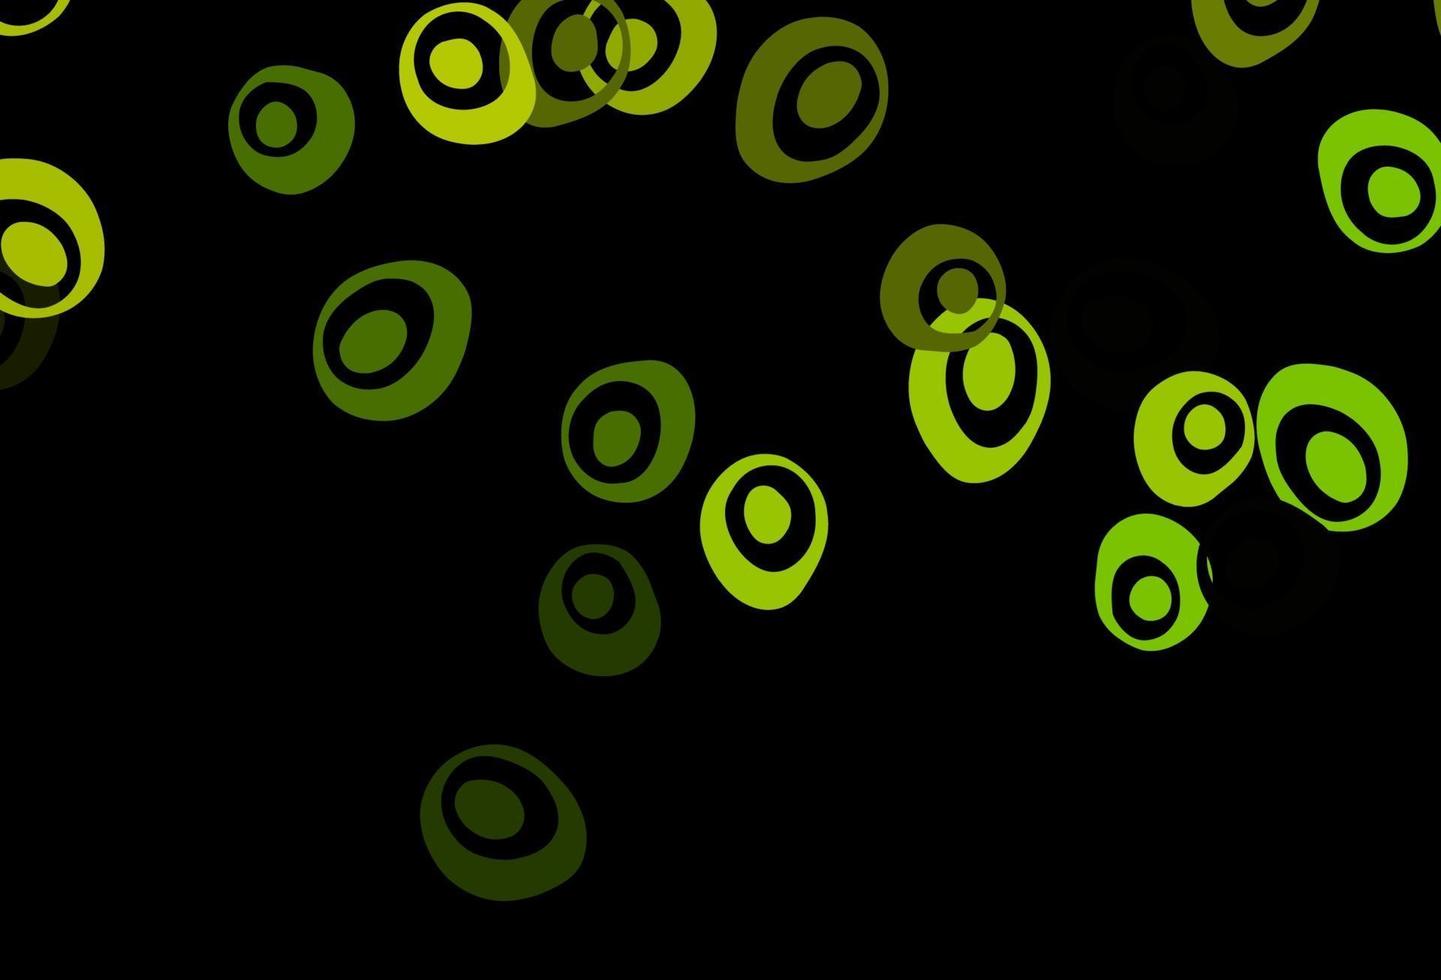 Dark Green, Yellow vector template with circles.